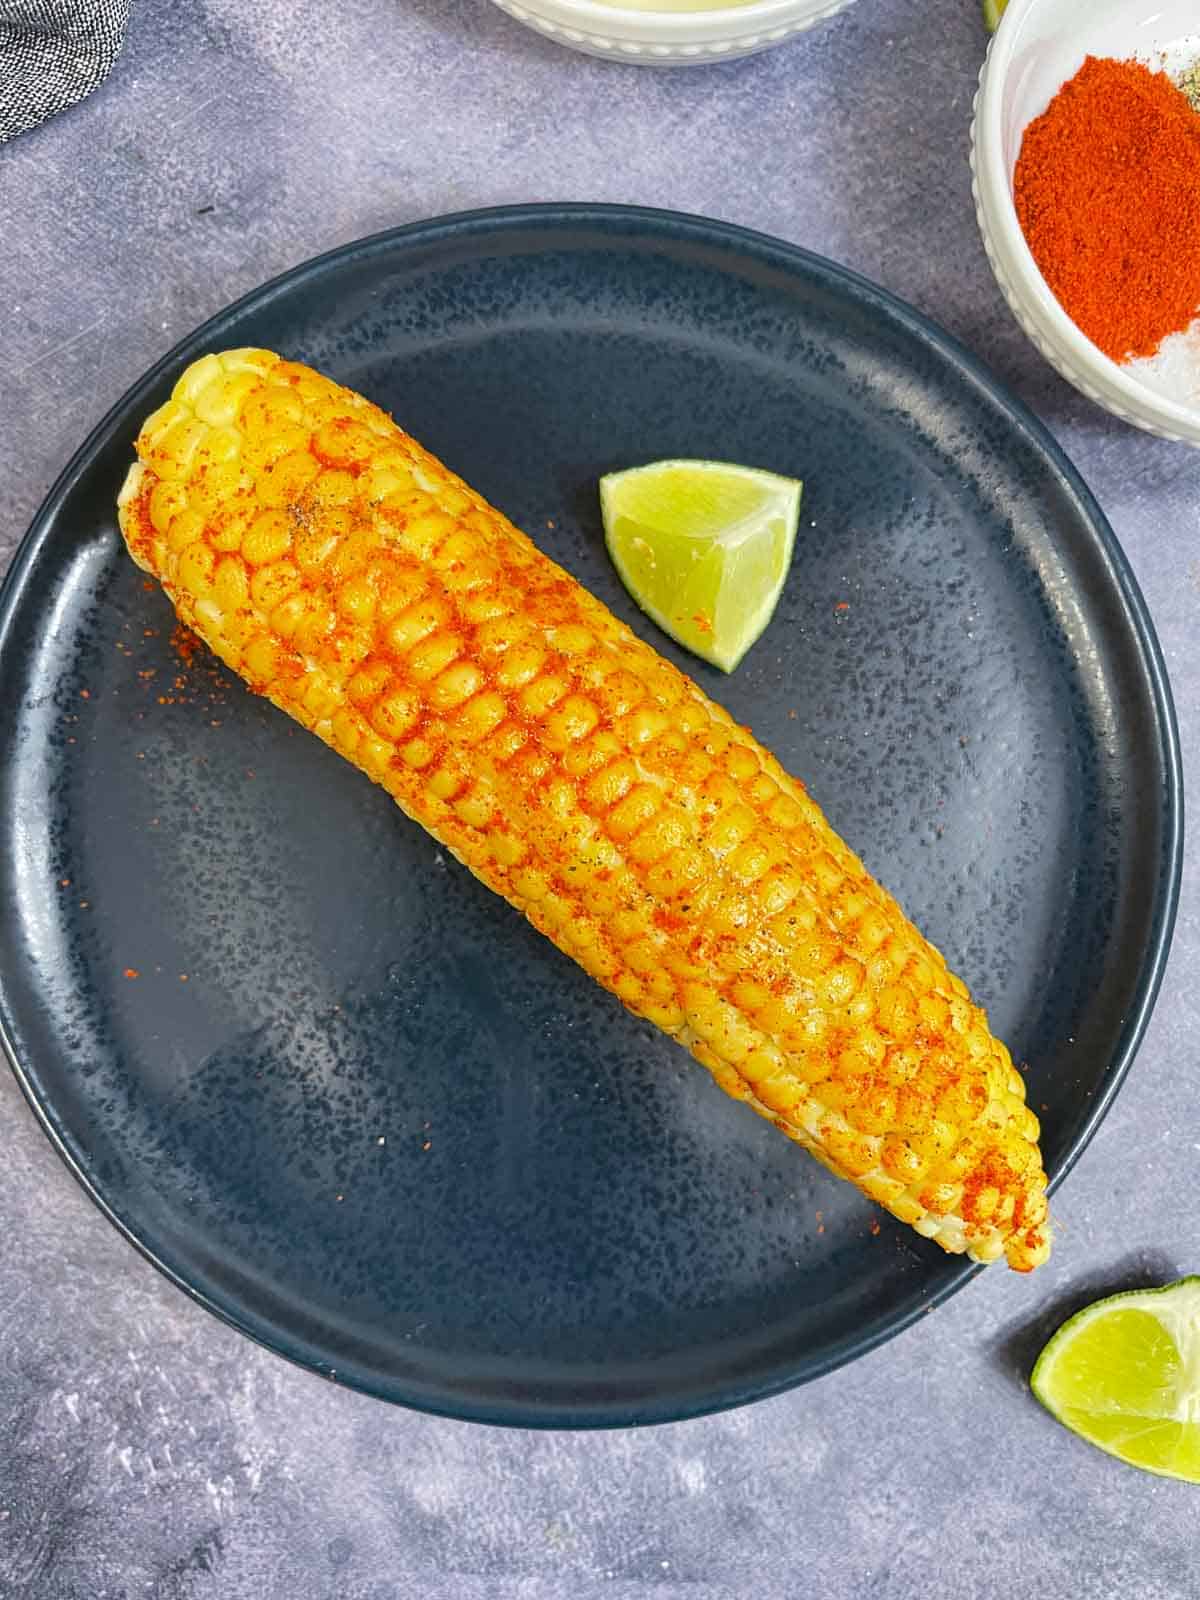 spiced corn on the cob on a plate with spices and lemon wedge on the side